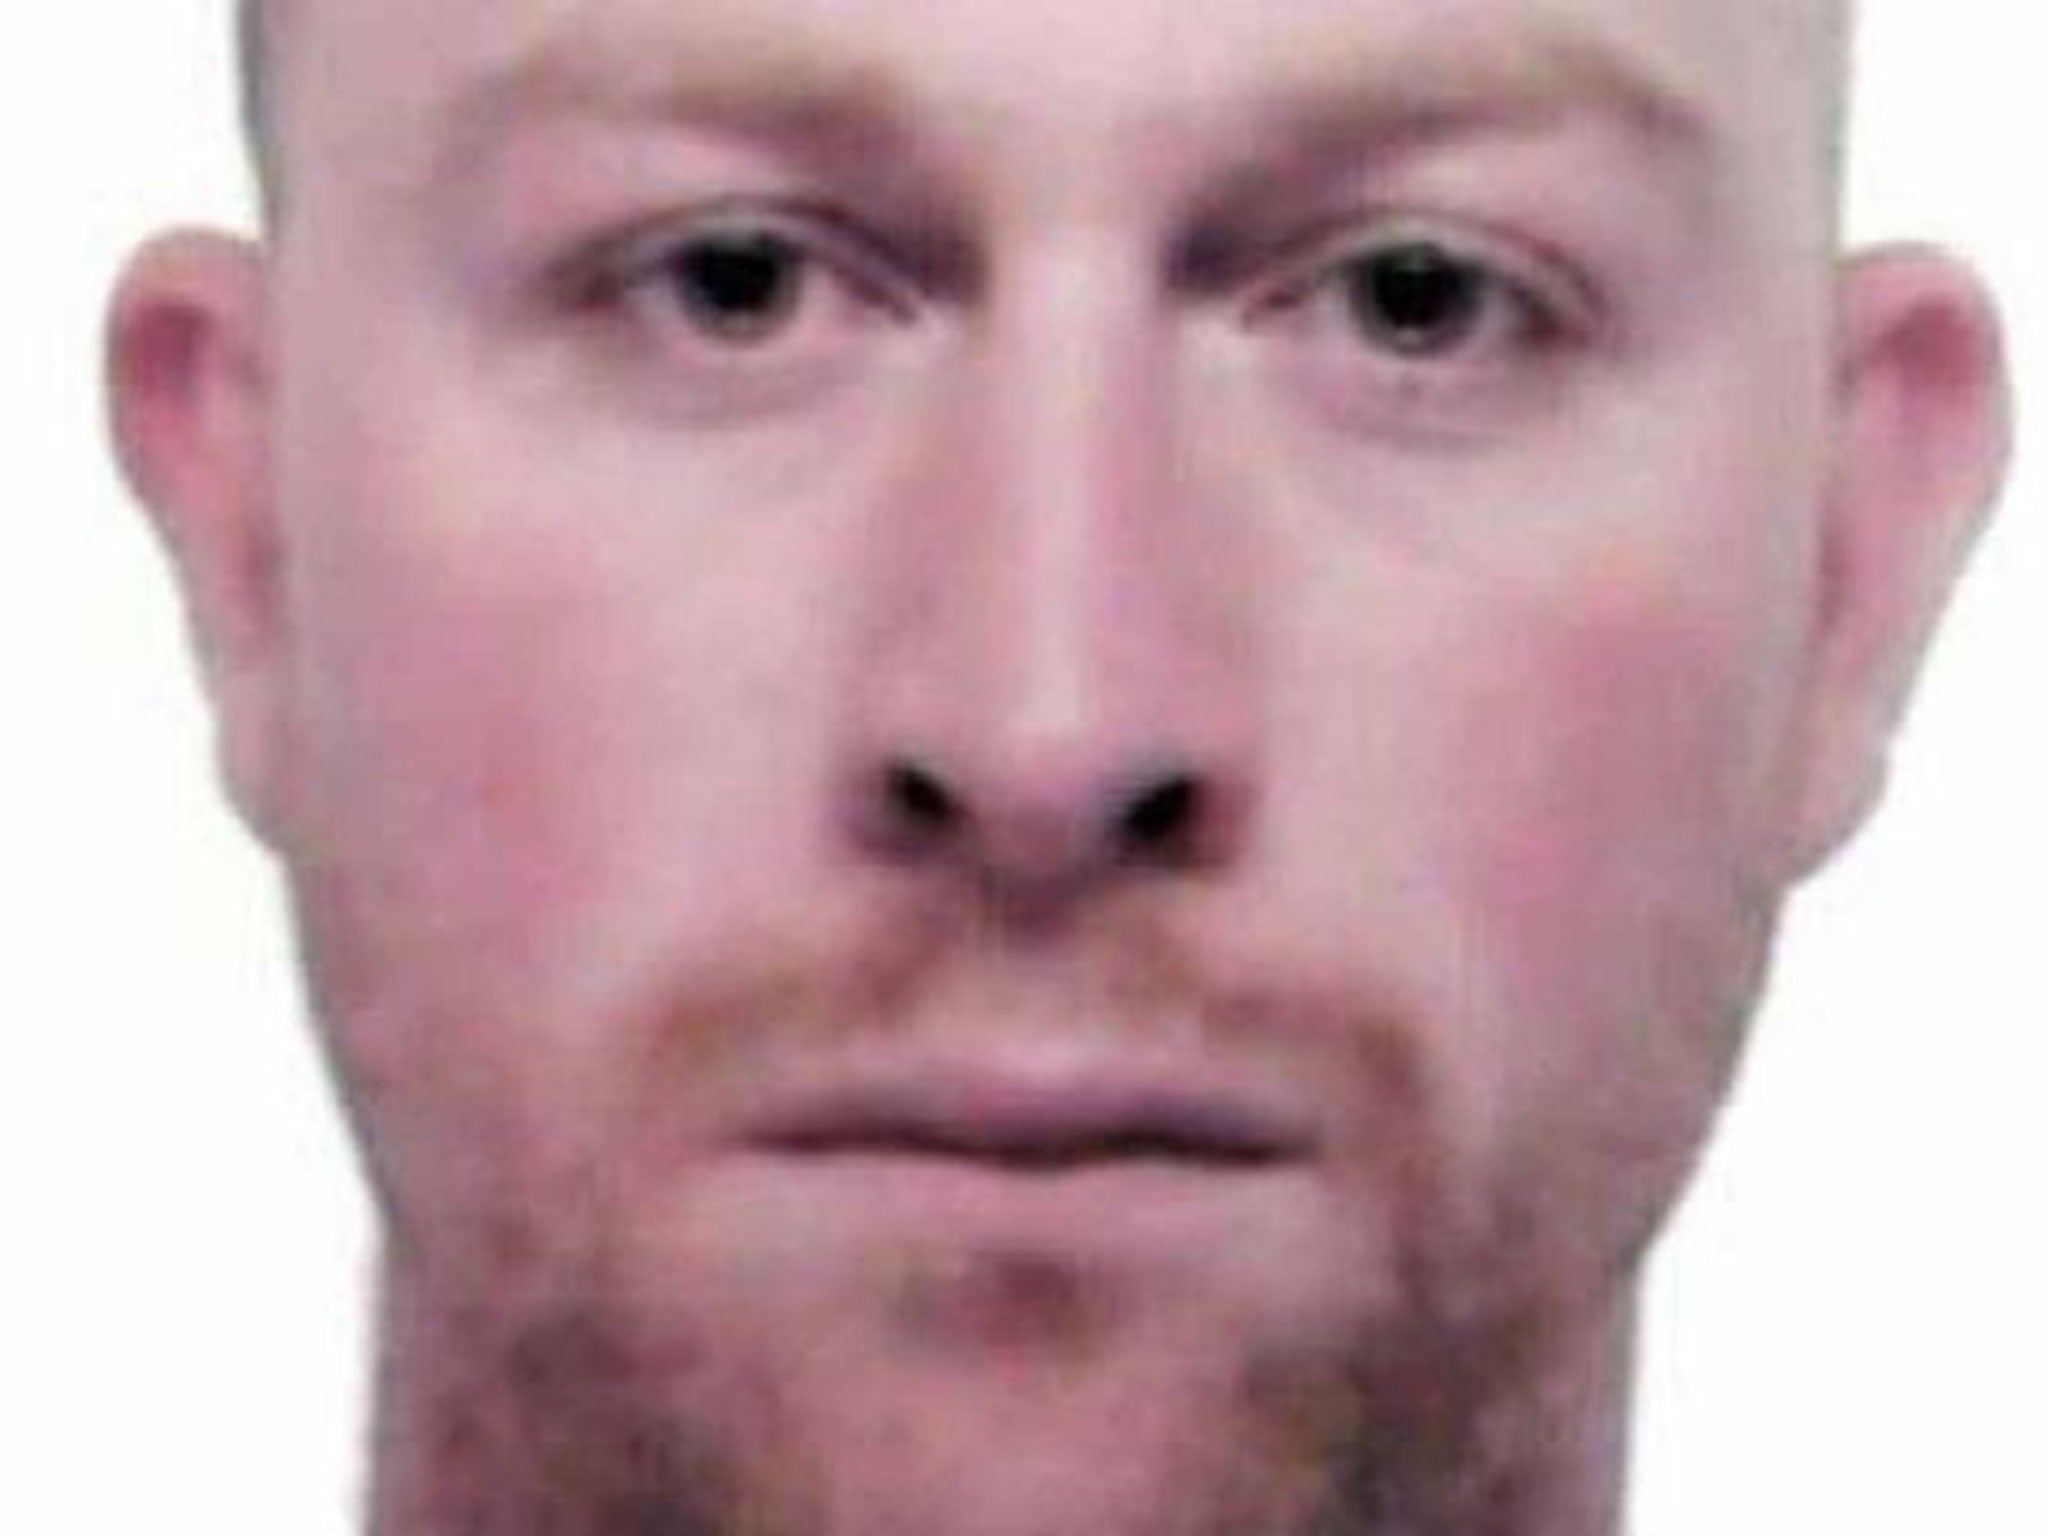 Kevin Parle is wanted for questioning over two murders in Liverpool